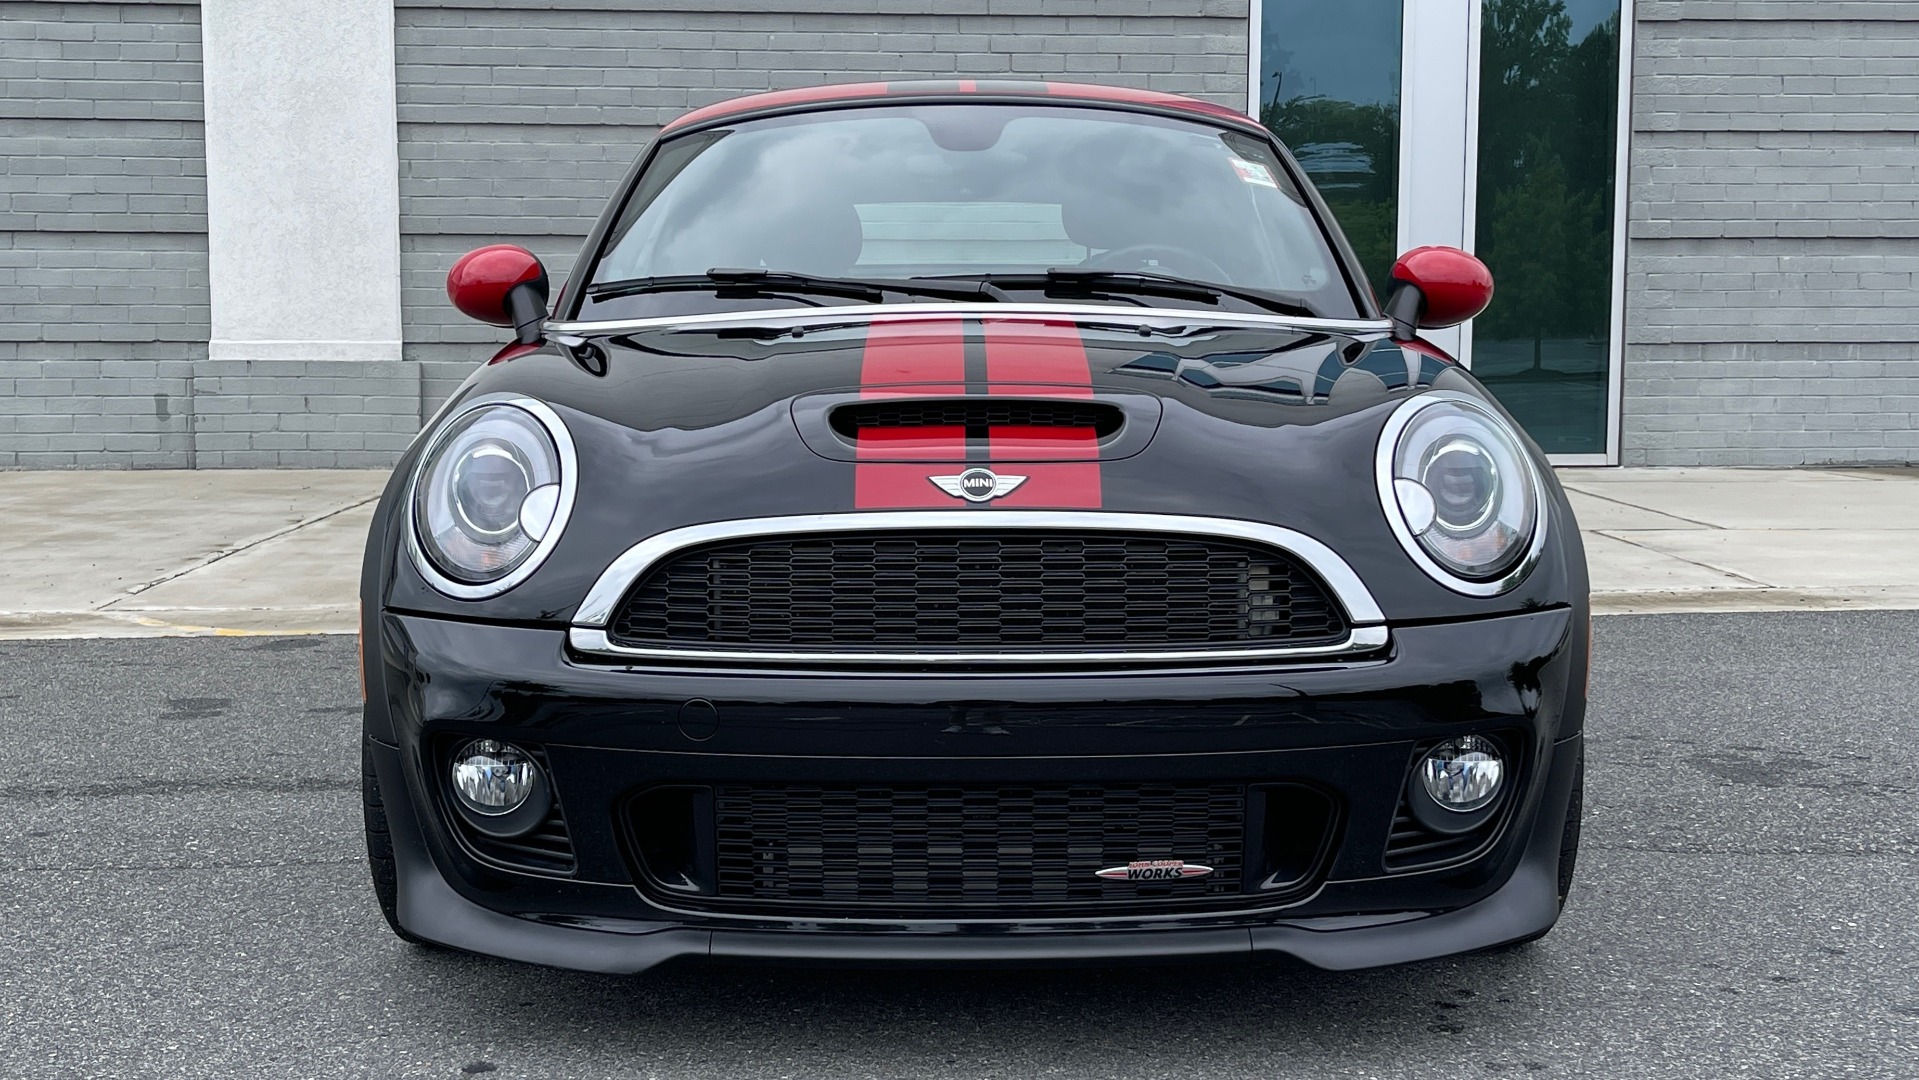 Used 2013 MINI COOPER COUPE JOHN COOPER WORKS / 1.6L TURBO / AUTO / H/K SOUND for sale Sold at Formula Imports in Charlotte NC 28227 11